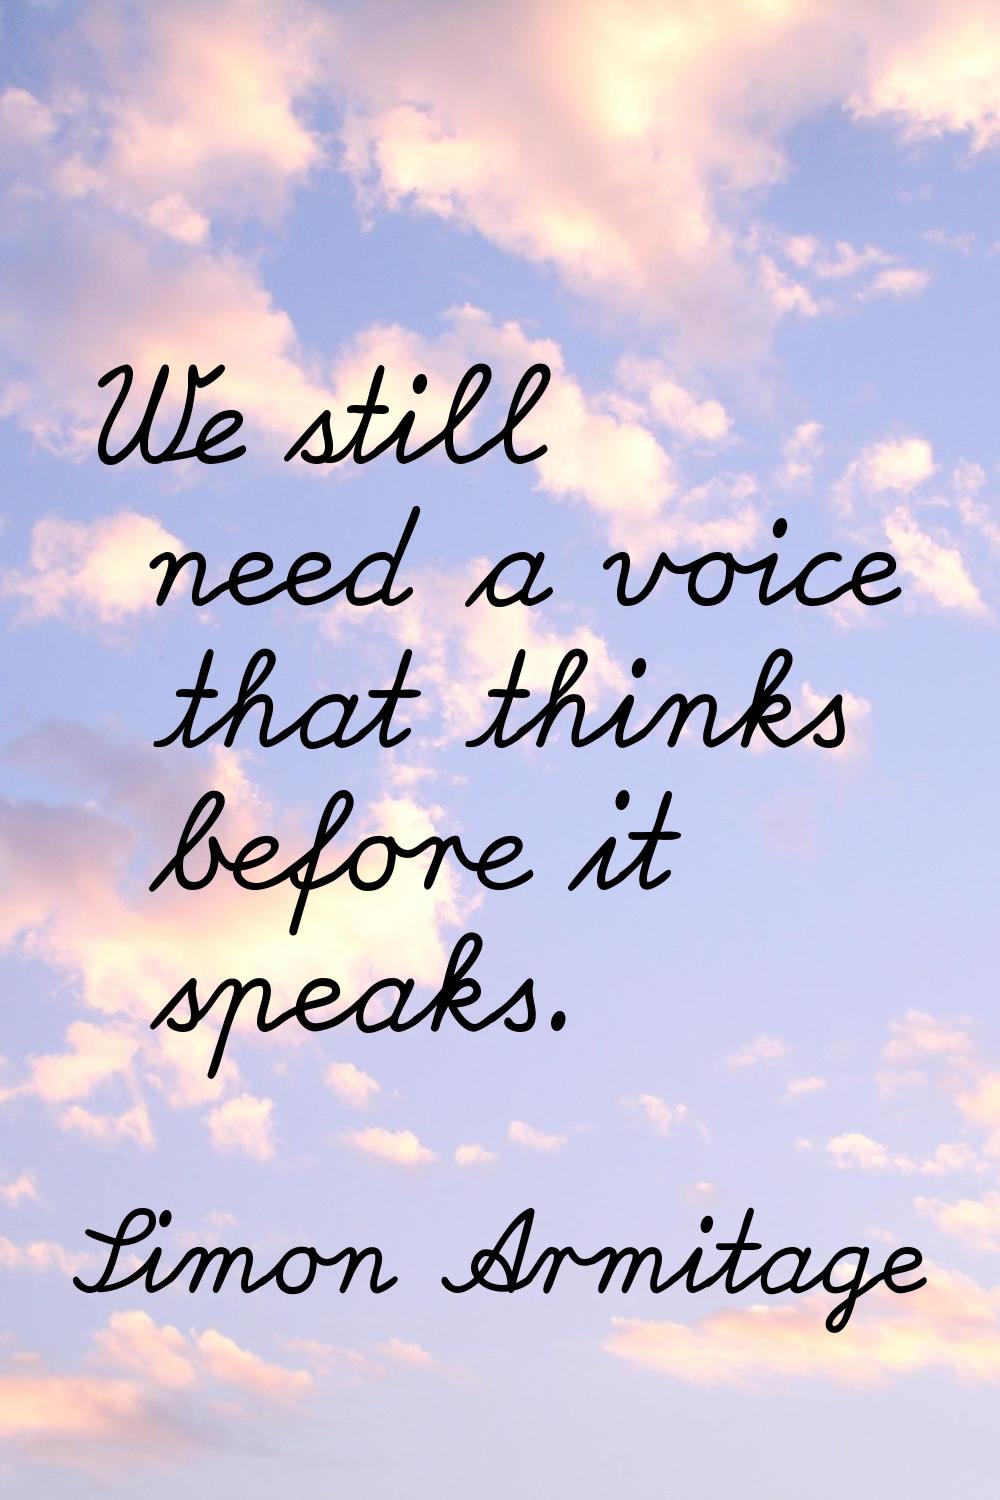 We still need a voice that thinks before it speaks.